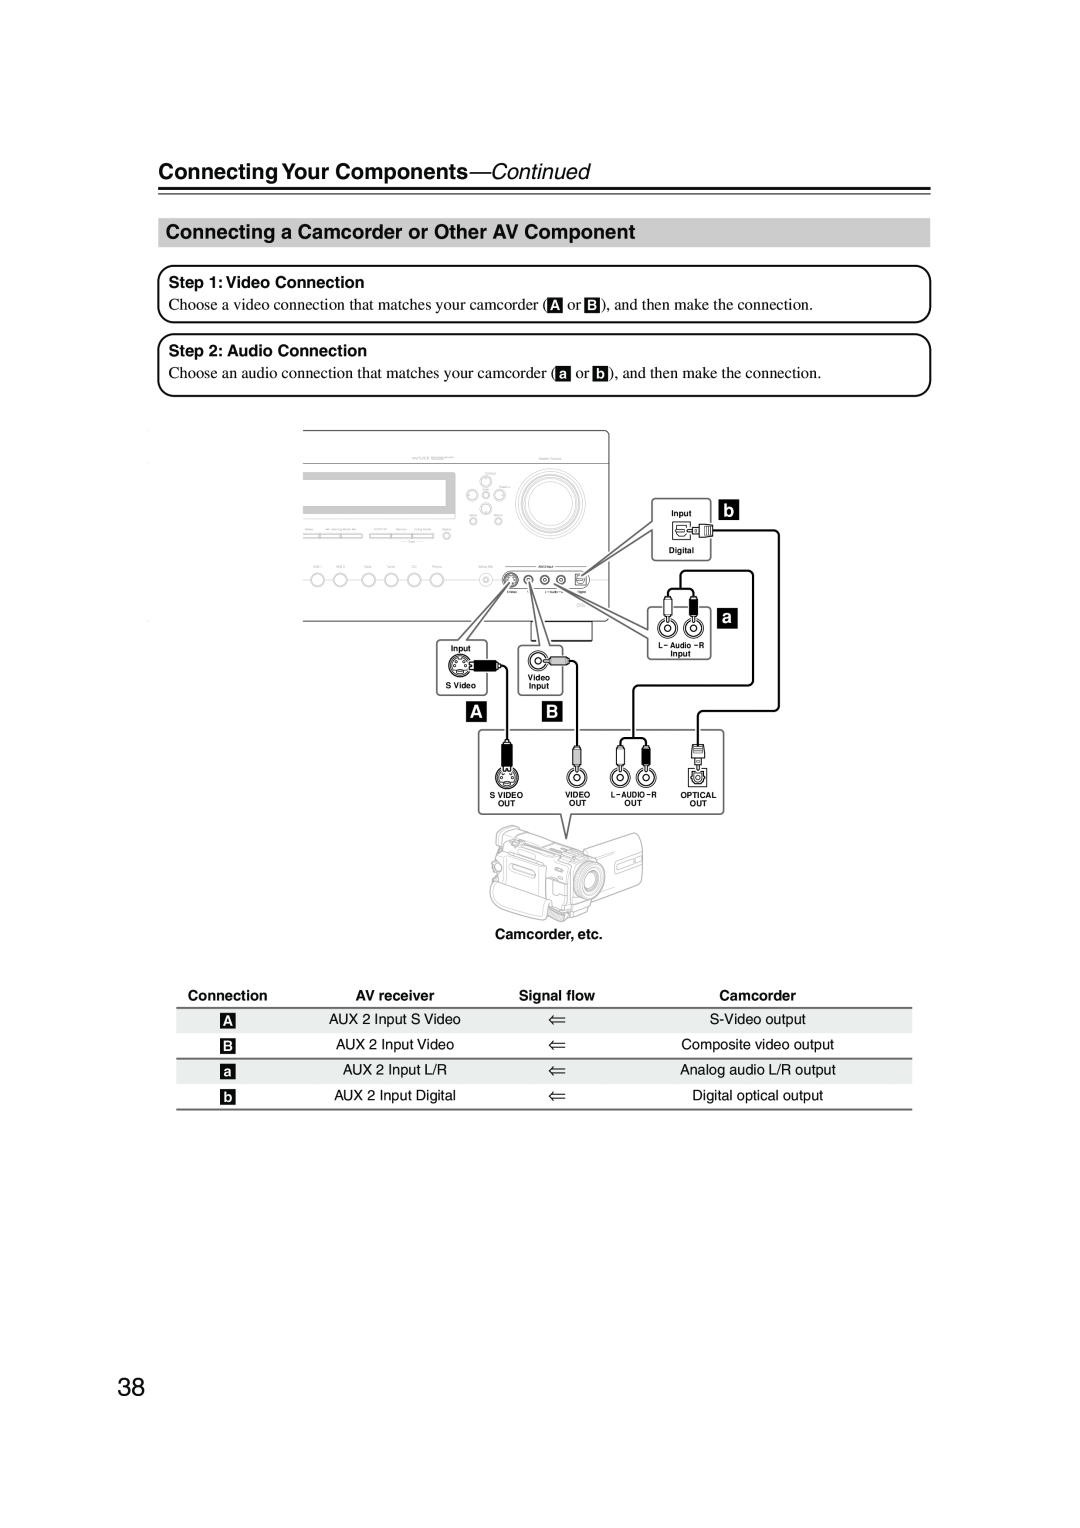 Integra DTR-7.8 instruction manual Connecting a Camcorder or Other AV Component, Connecting Your Components-Continued 